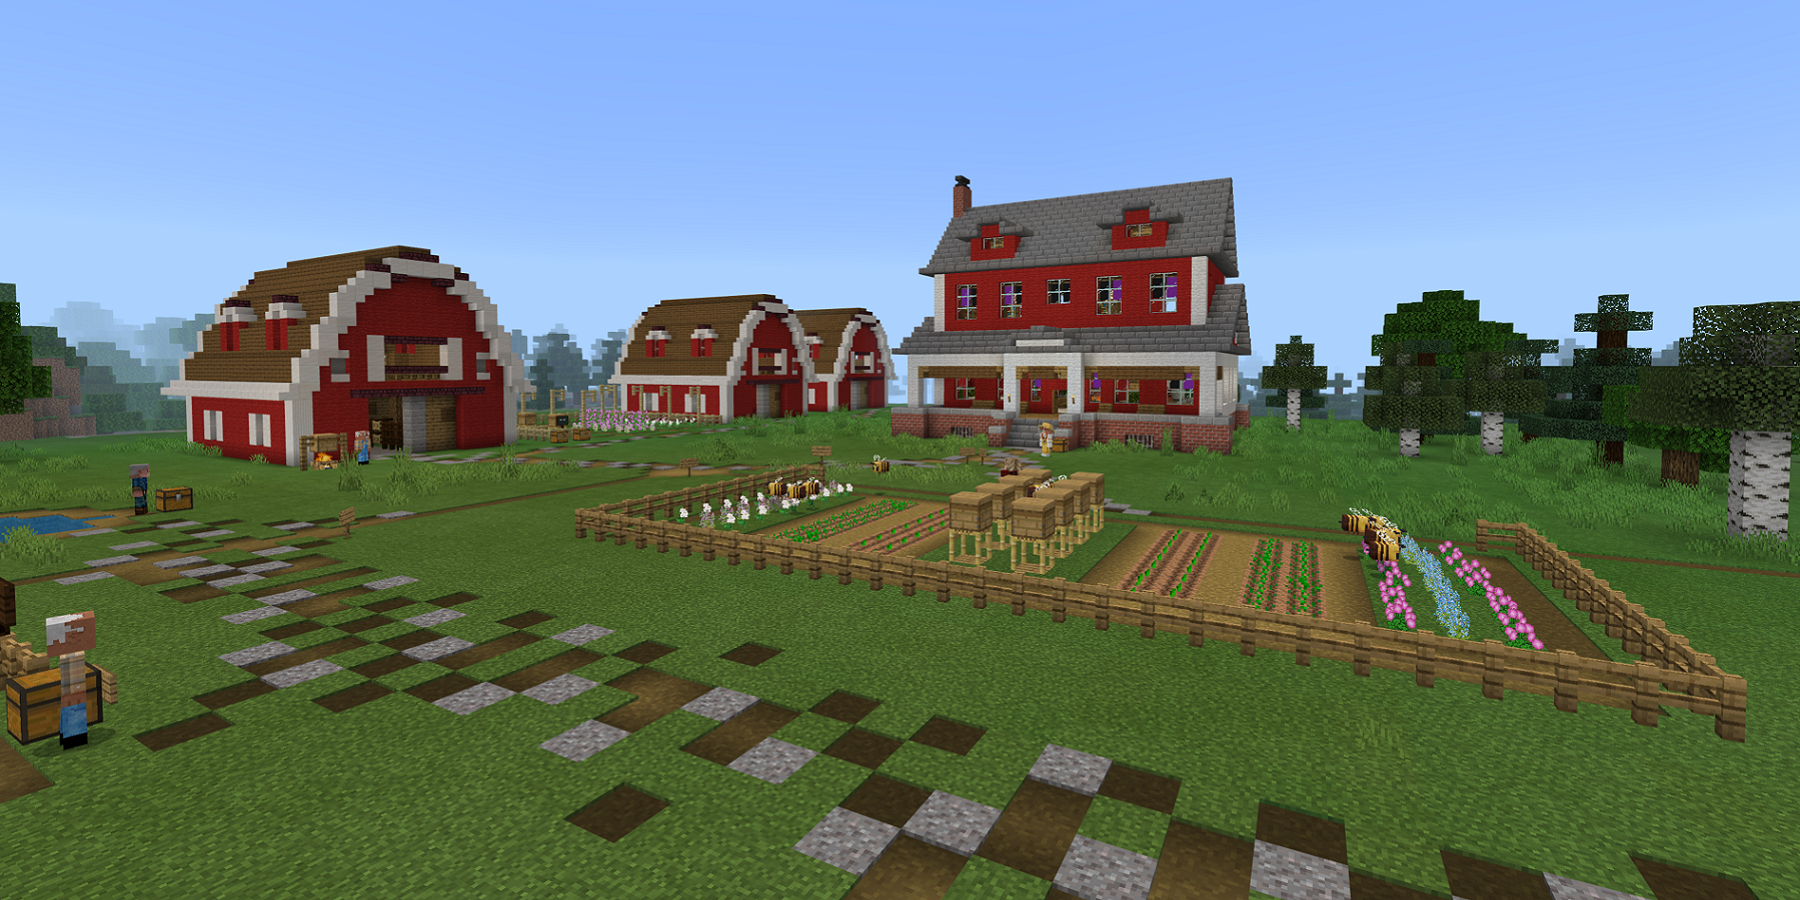 Screenshot from Minecraft showing a farm, which includes a farmhouse and a barn.